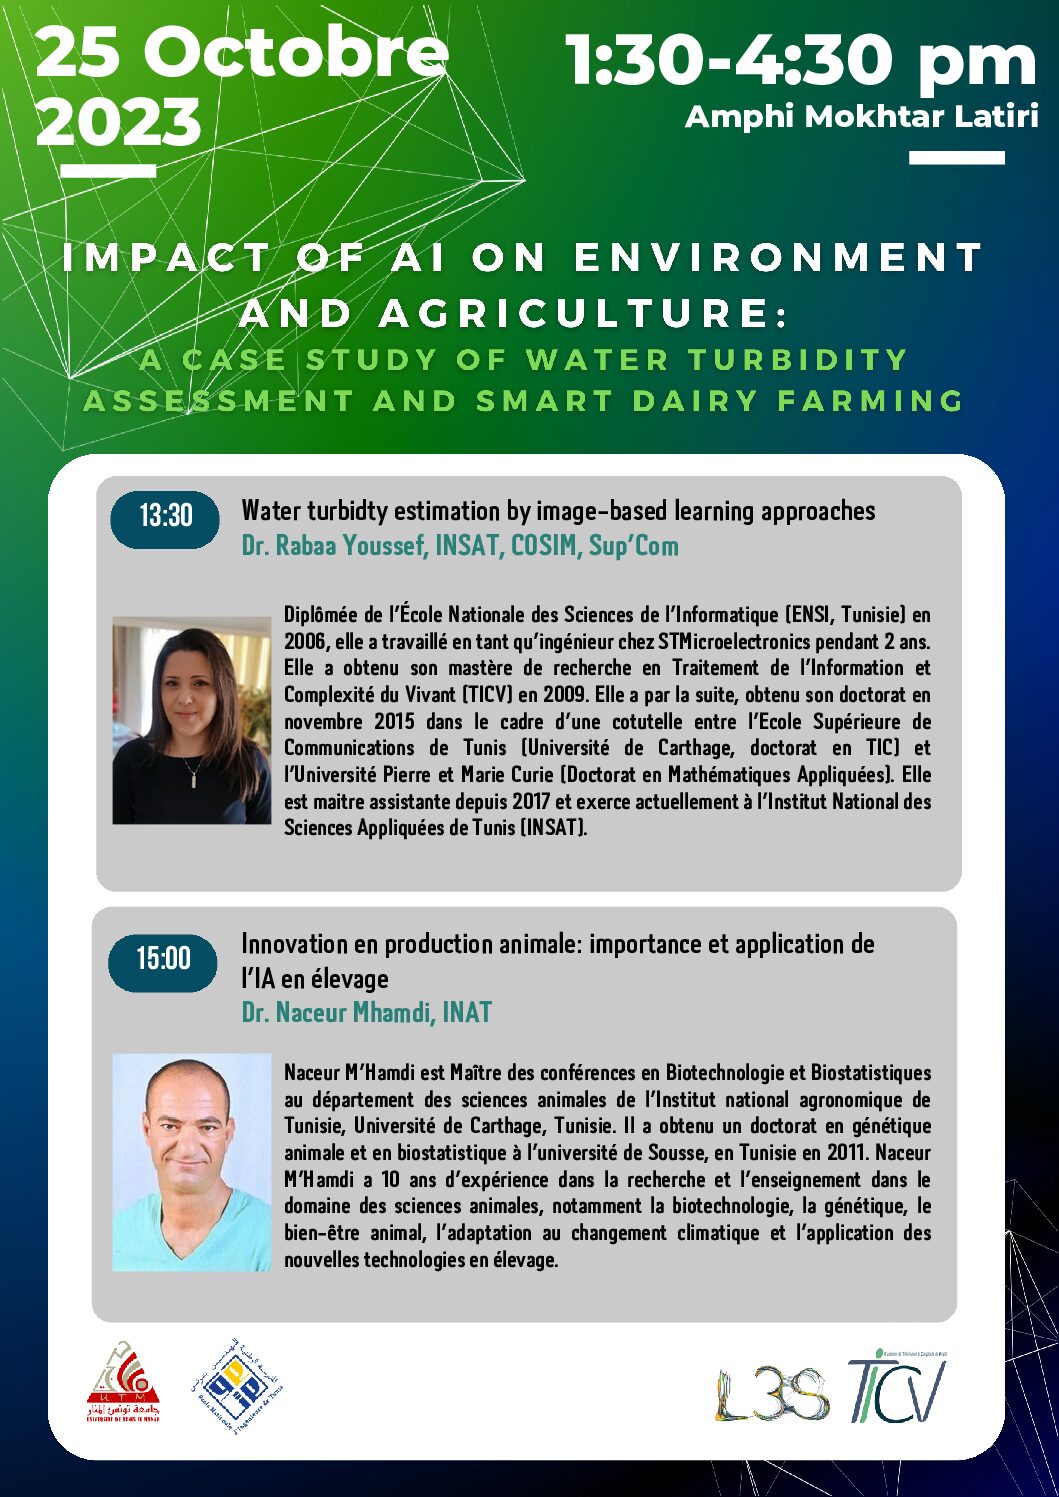 Impact Of AI On Environment and Agriculture : A case study of water turbidity assessment and smart dairy farming